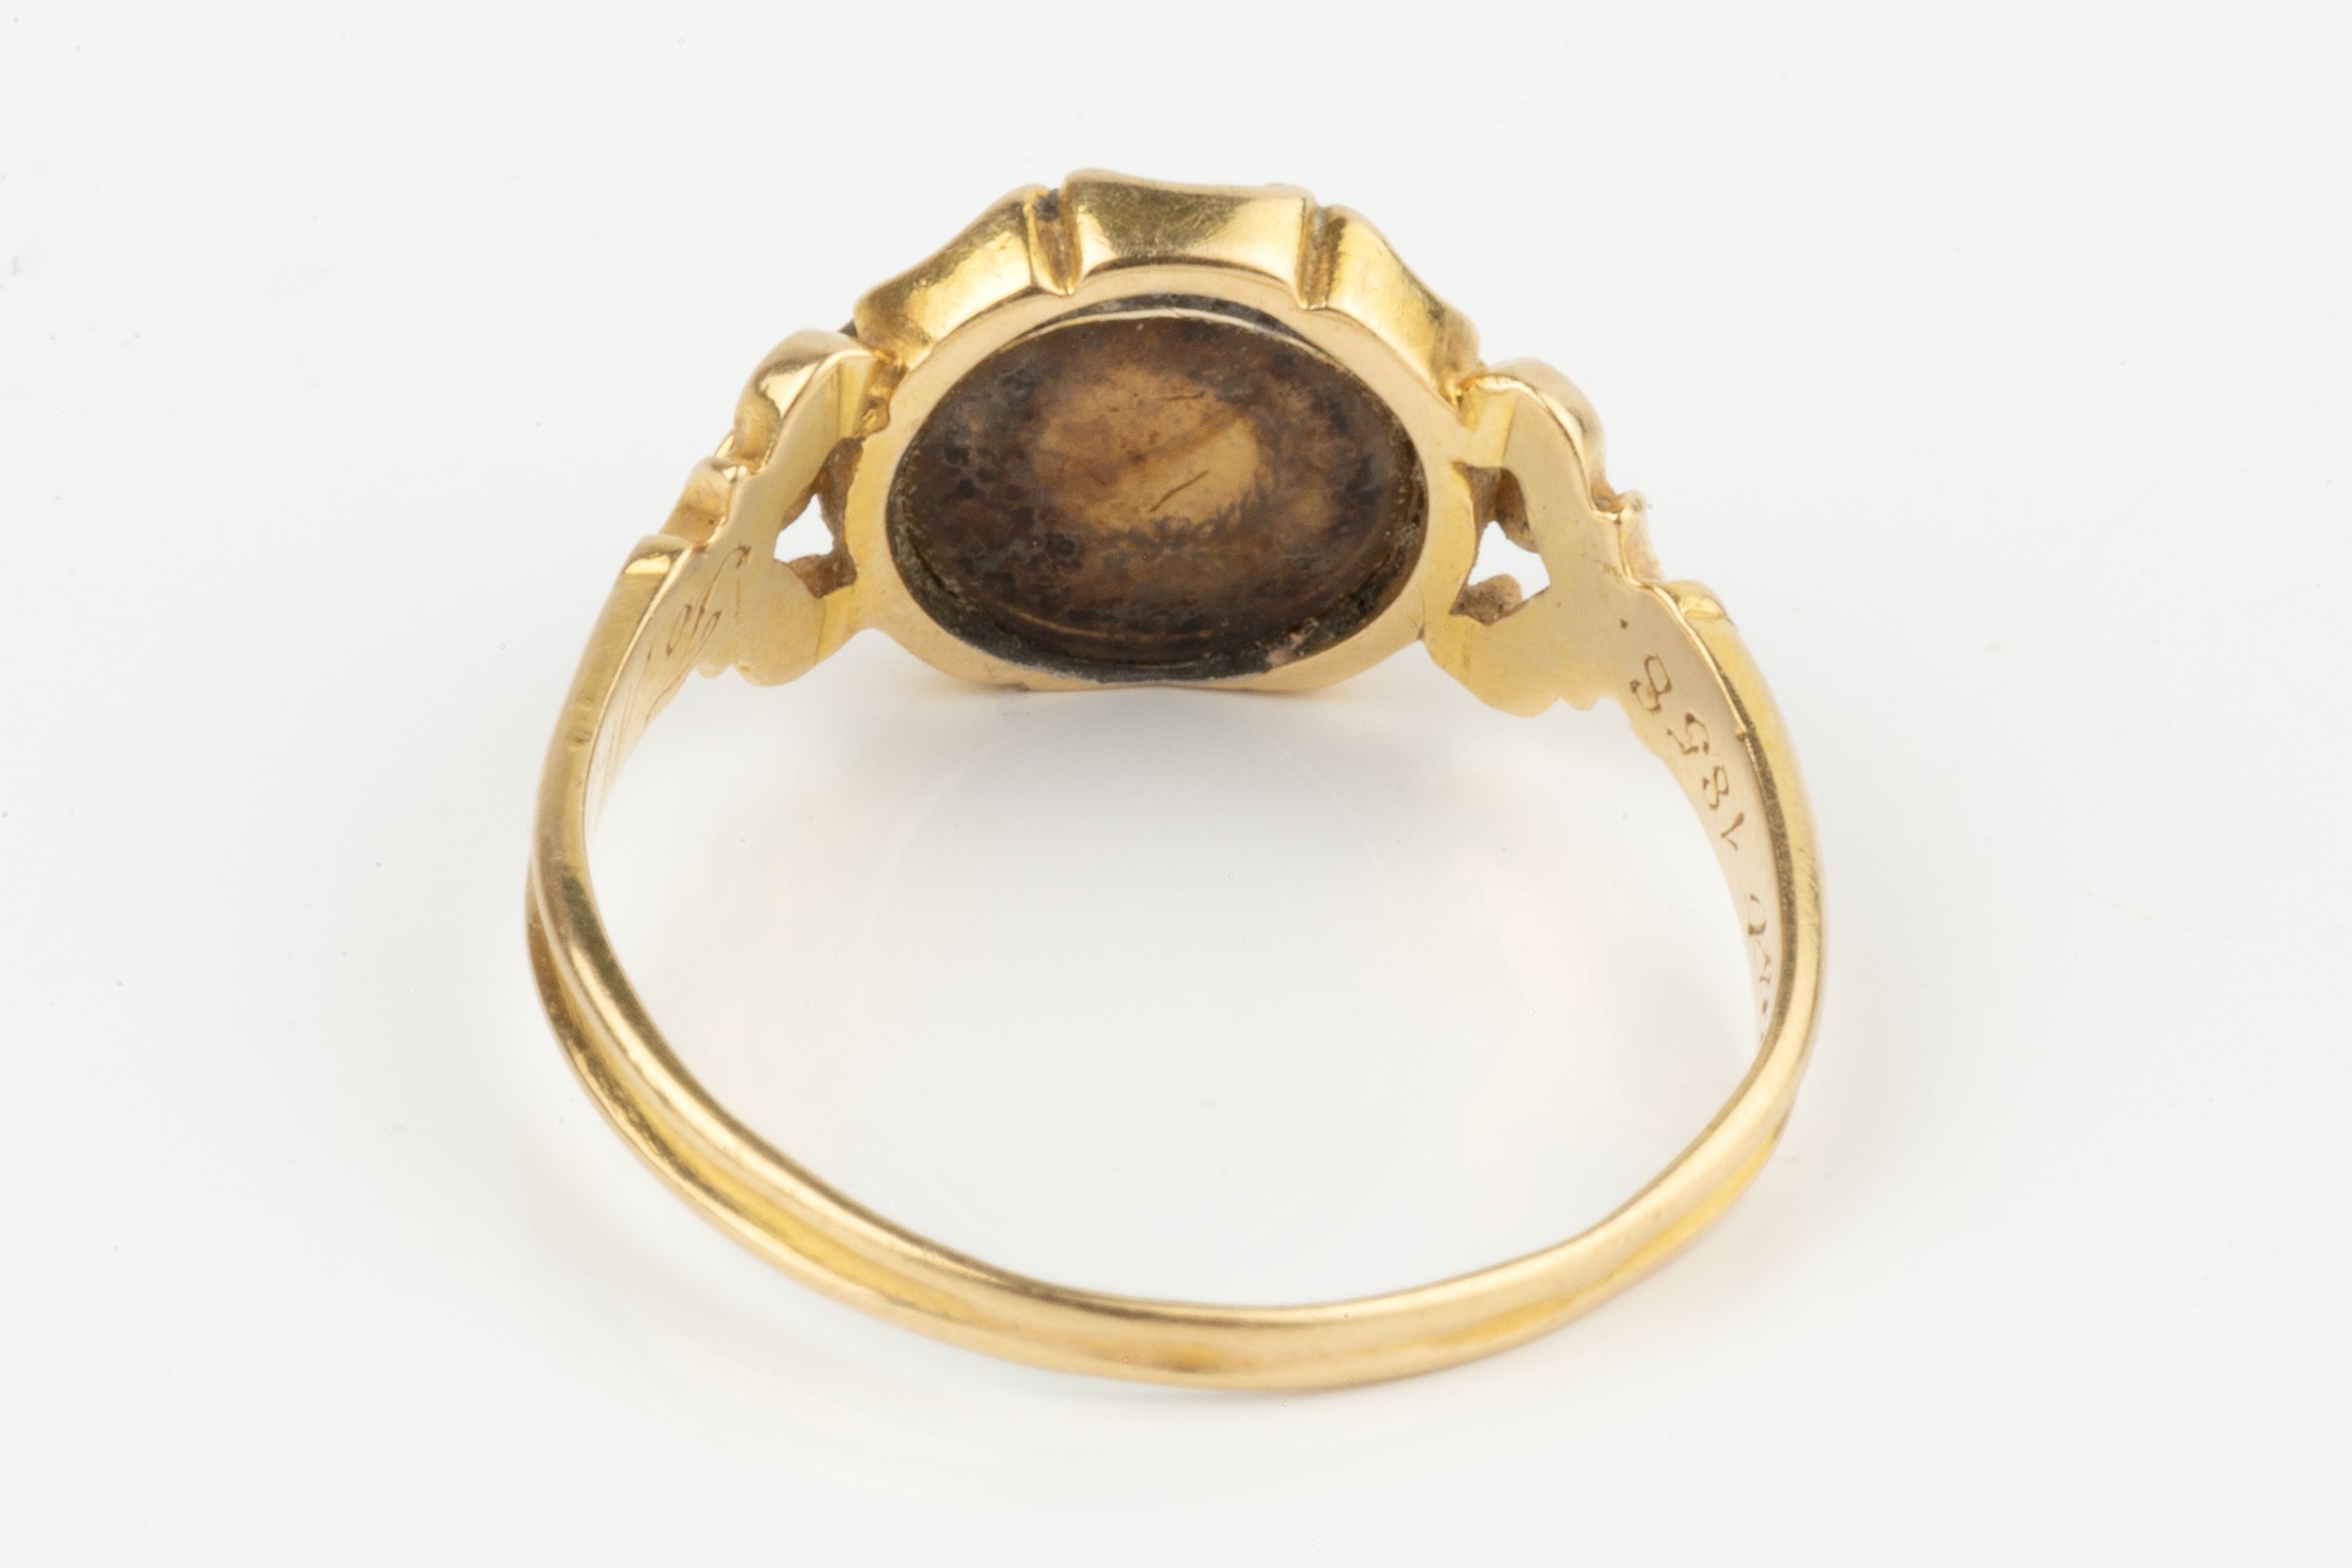 A 19th century gold memorial ring, having glazed relief portrait, possibly depicting the Duke of - Image 2 of 3